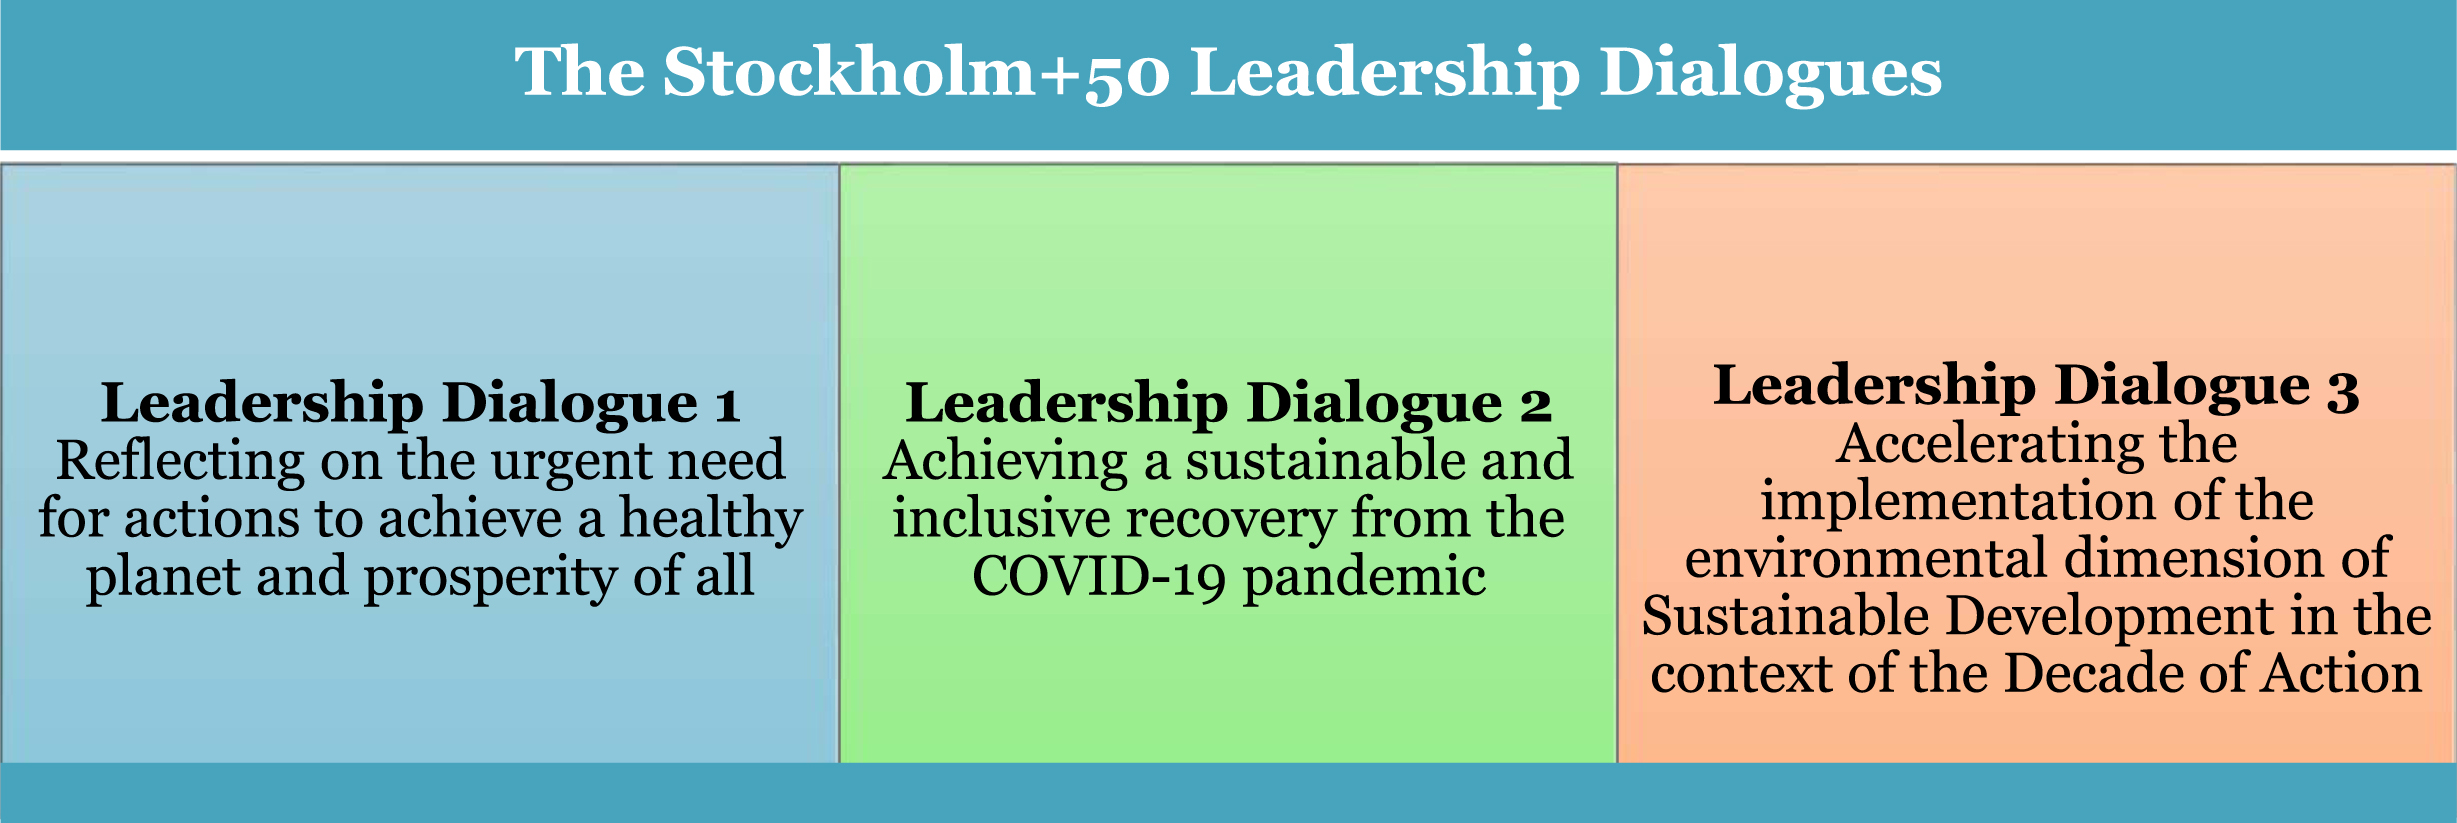 The Stockholm+50 Leadership Dialogues.